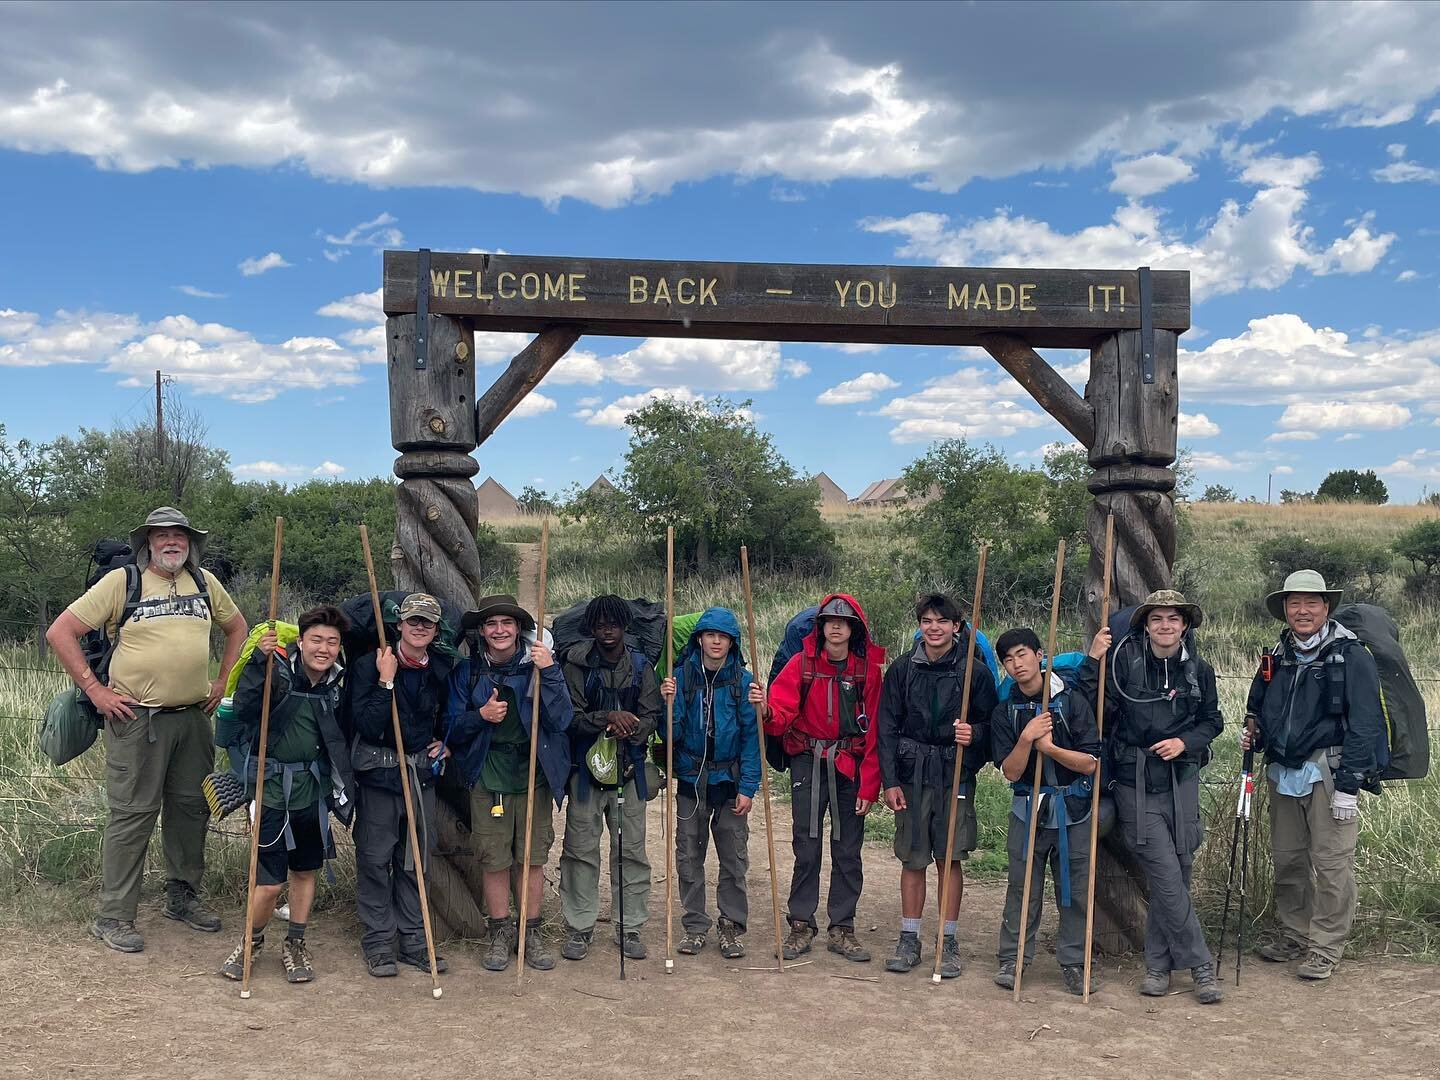 Troop 1 Philmont crew 710-7E made it back to base camp! What a great adventure. 41 miles hiked and 6200 feet of elevation climbed.  #philmontscoutranch #troop1altadena